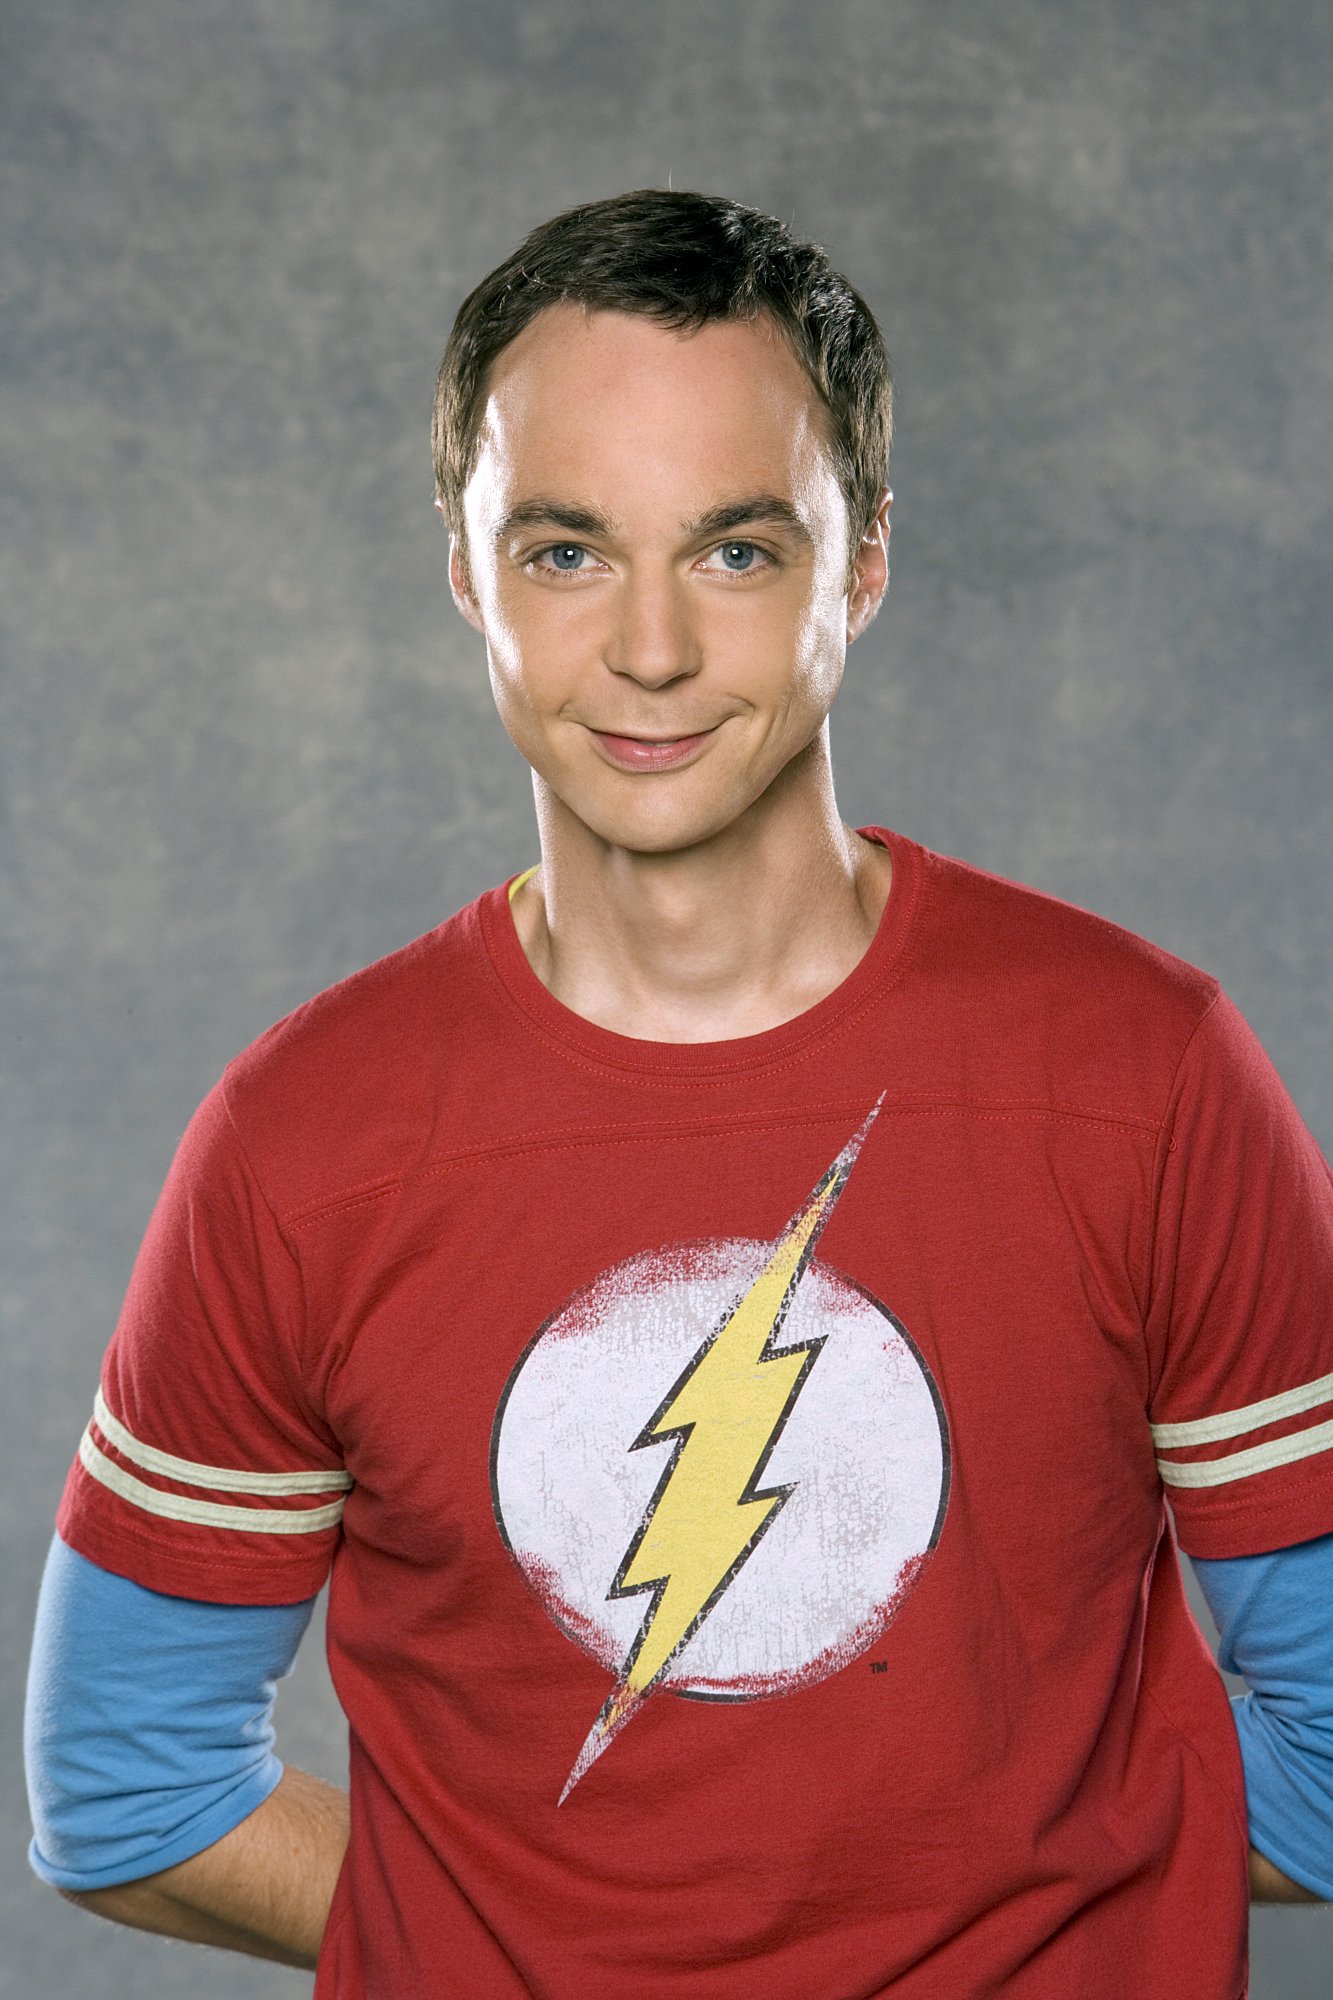 Gallery Promo Coverage photo of Jim Parsons as Sheldon Cooper on the CBS sitcom "The Big Bang Theory" | Source: Getty Images